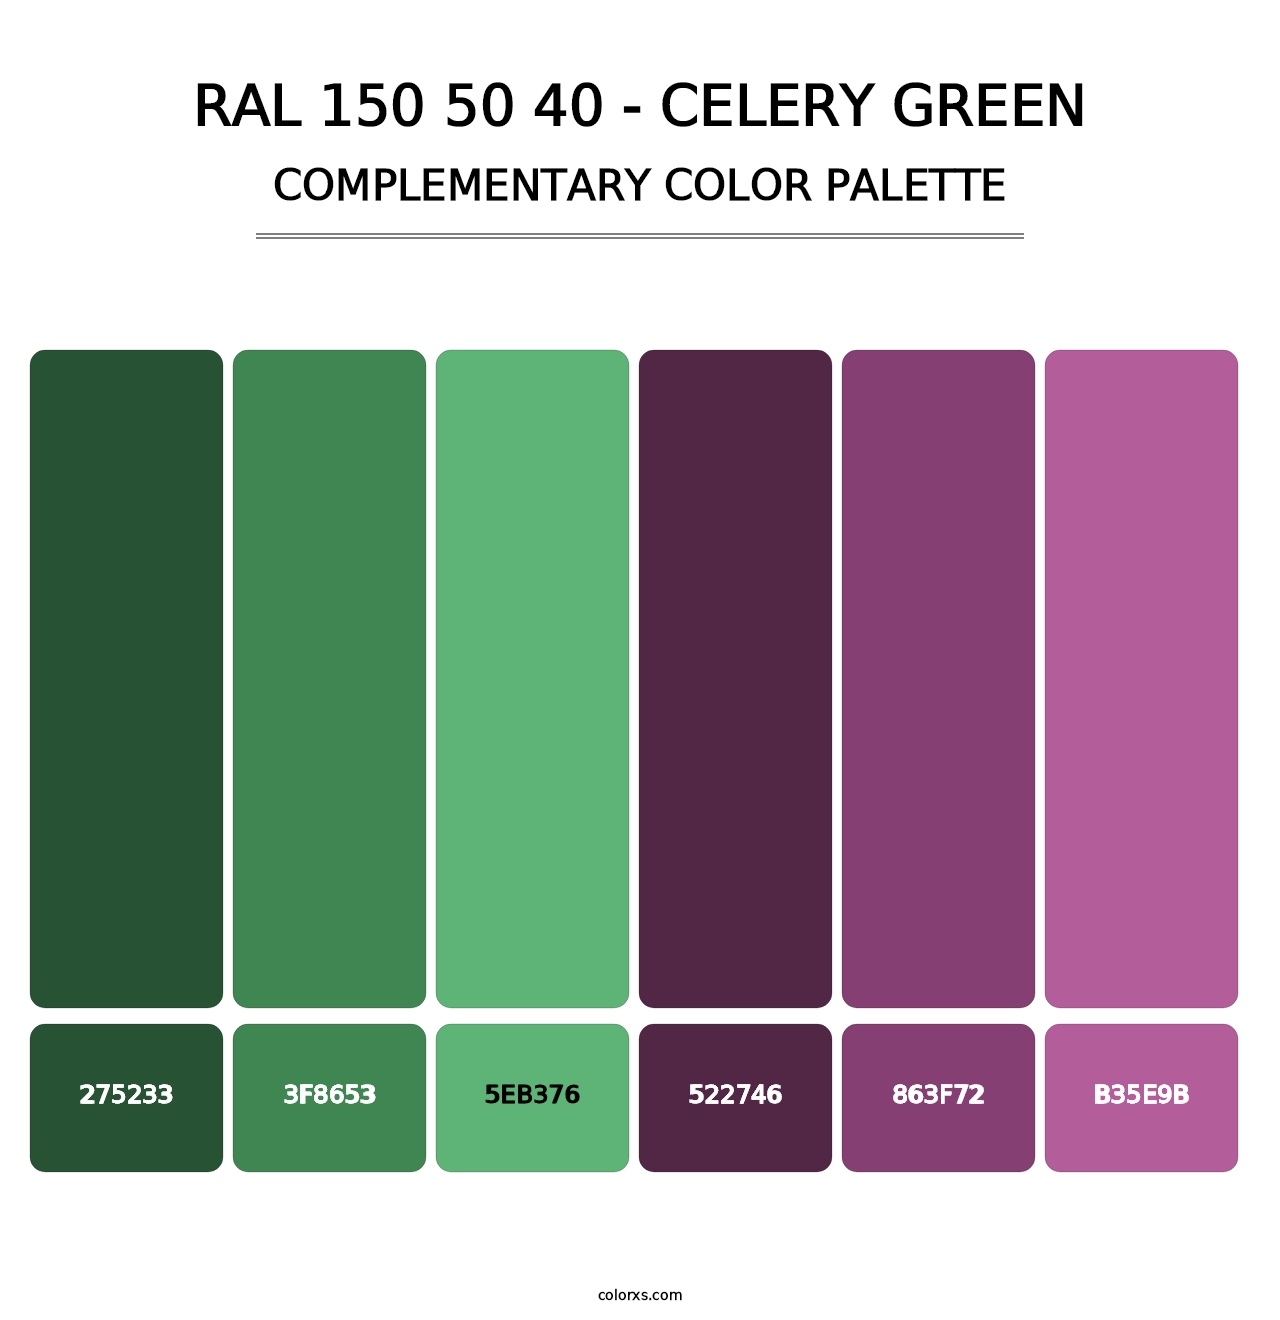 RAL 150 50 40 - Celery Green - Complementary Color Palette